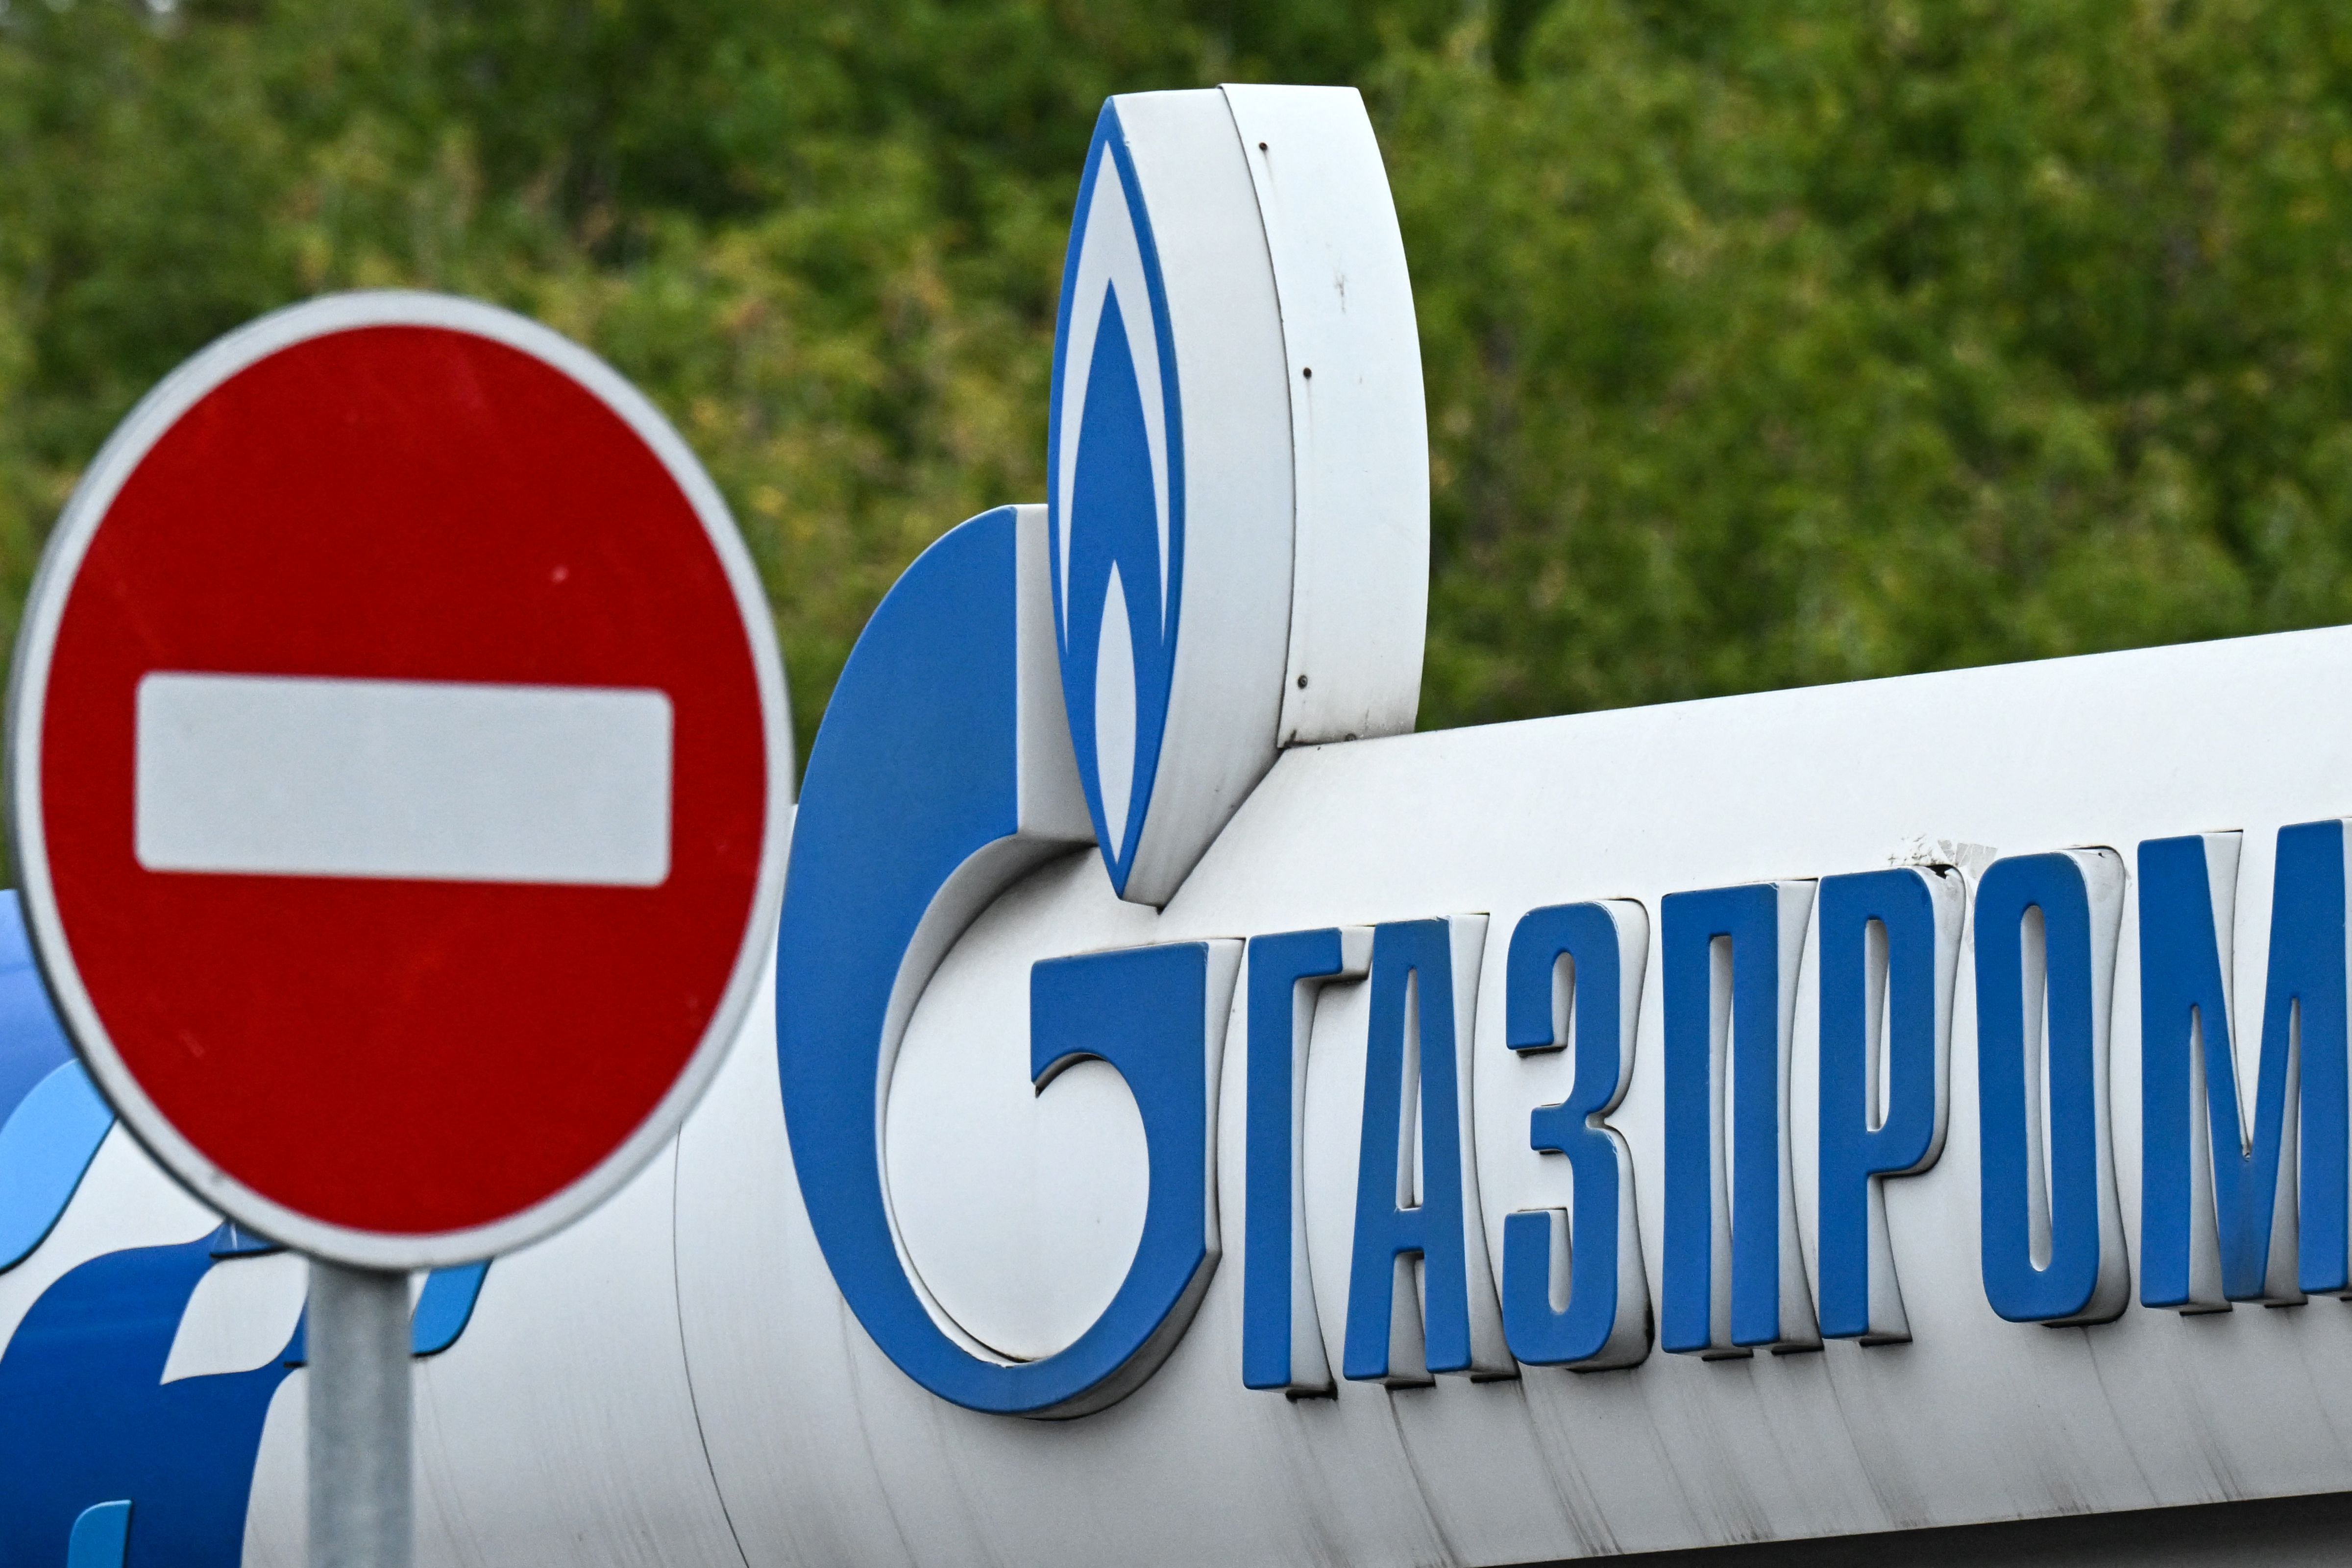 The logo of the Russian energy giant Gazprom on a gas station in Moscow.  (Photo by Kirill KUDRYAVTSEV / AFP)